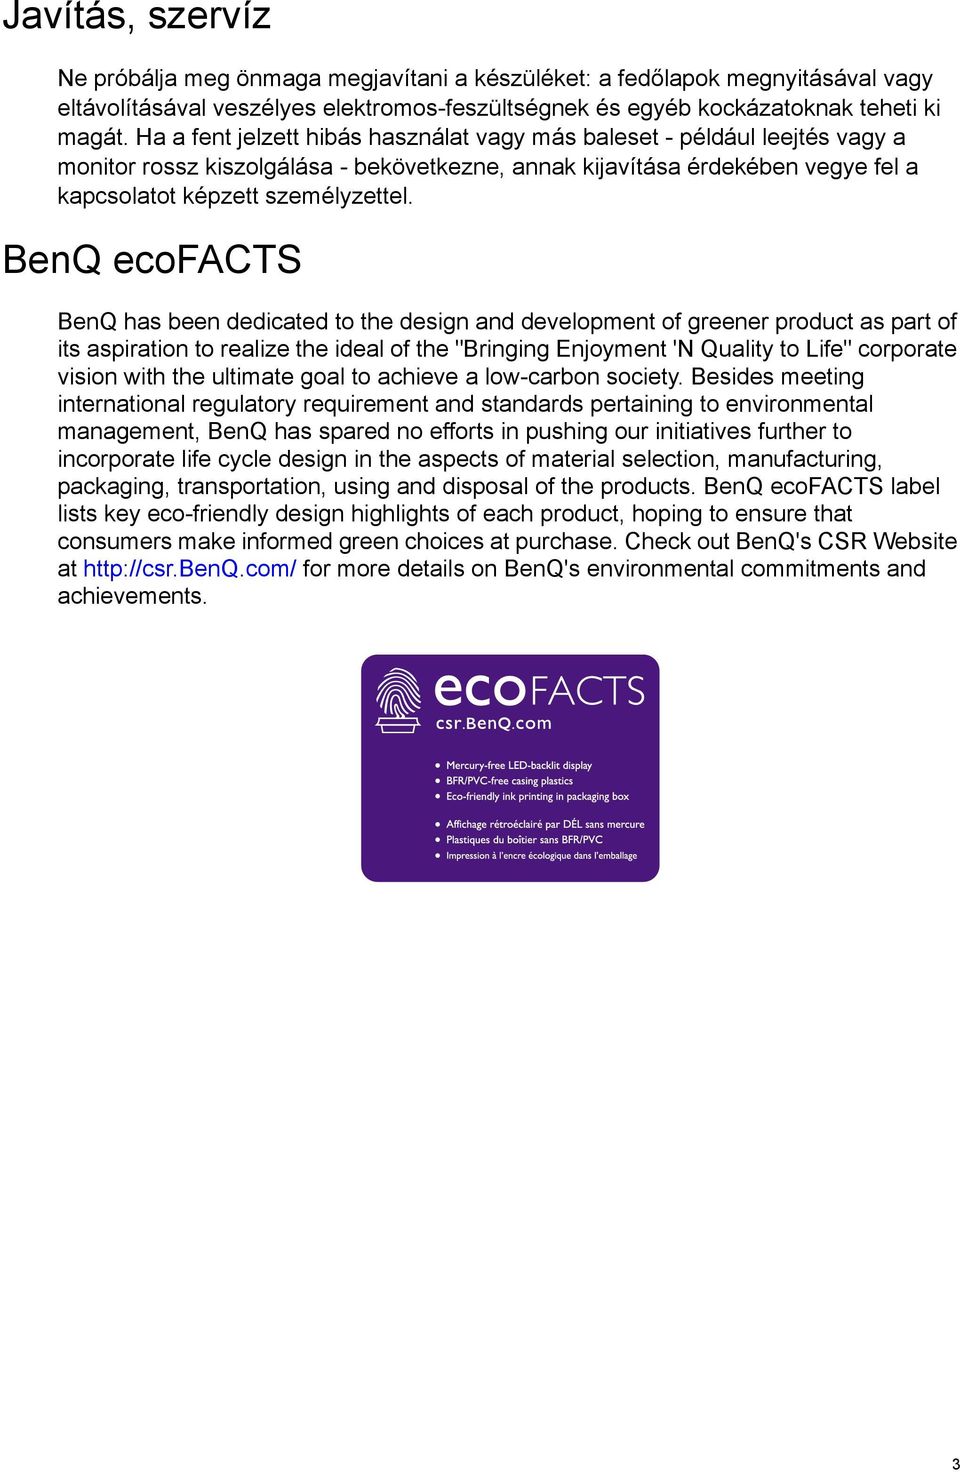 BenQ ecofacts BenQ has been dedicated to the design and development of greener product as part of its aspiration to realize the ideal of the "Bringing Enjoyment 'N Quality to Life" corporate vision